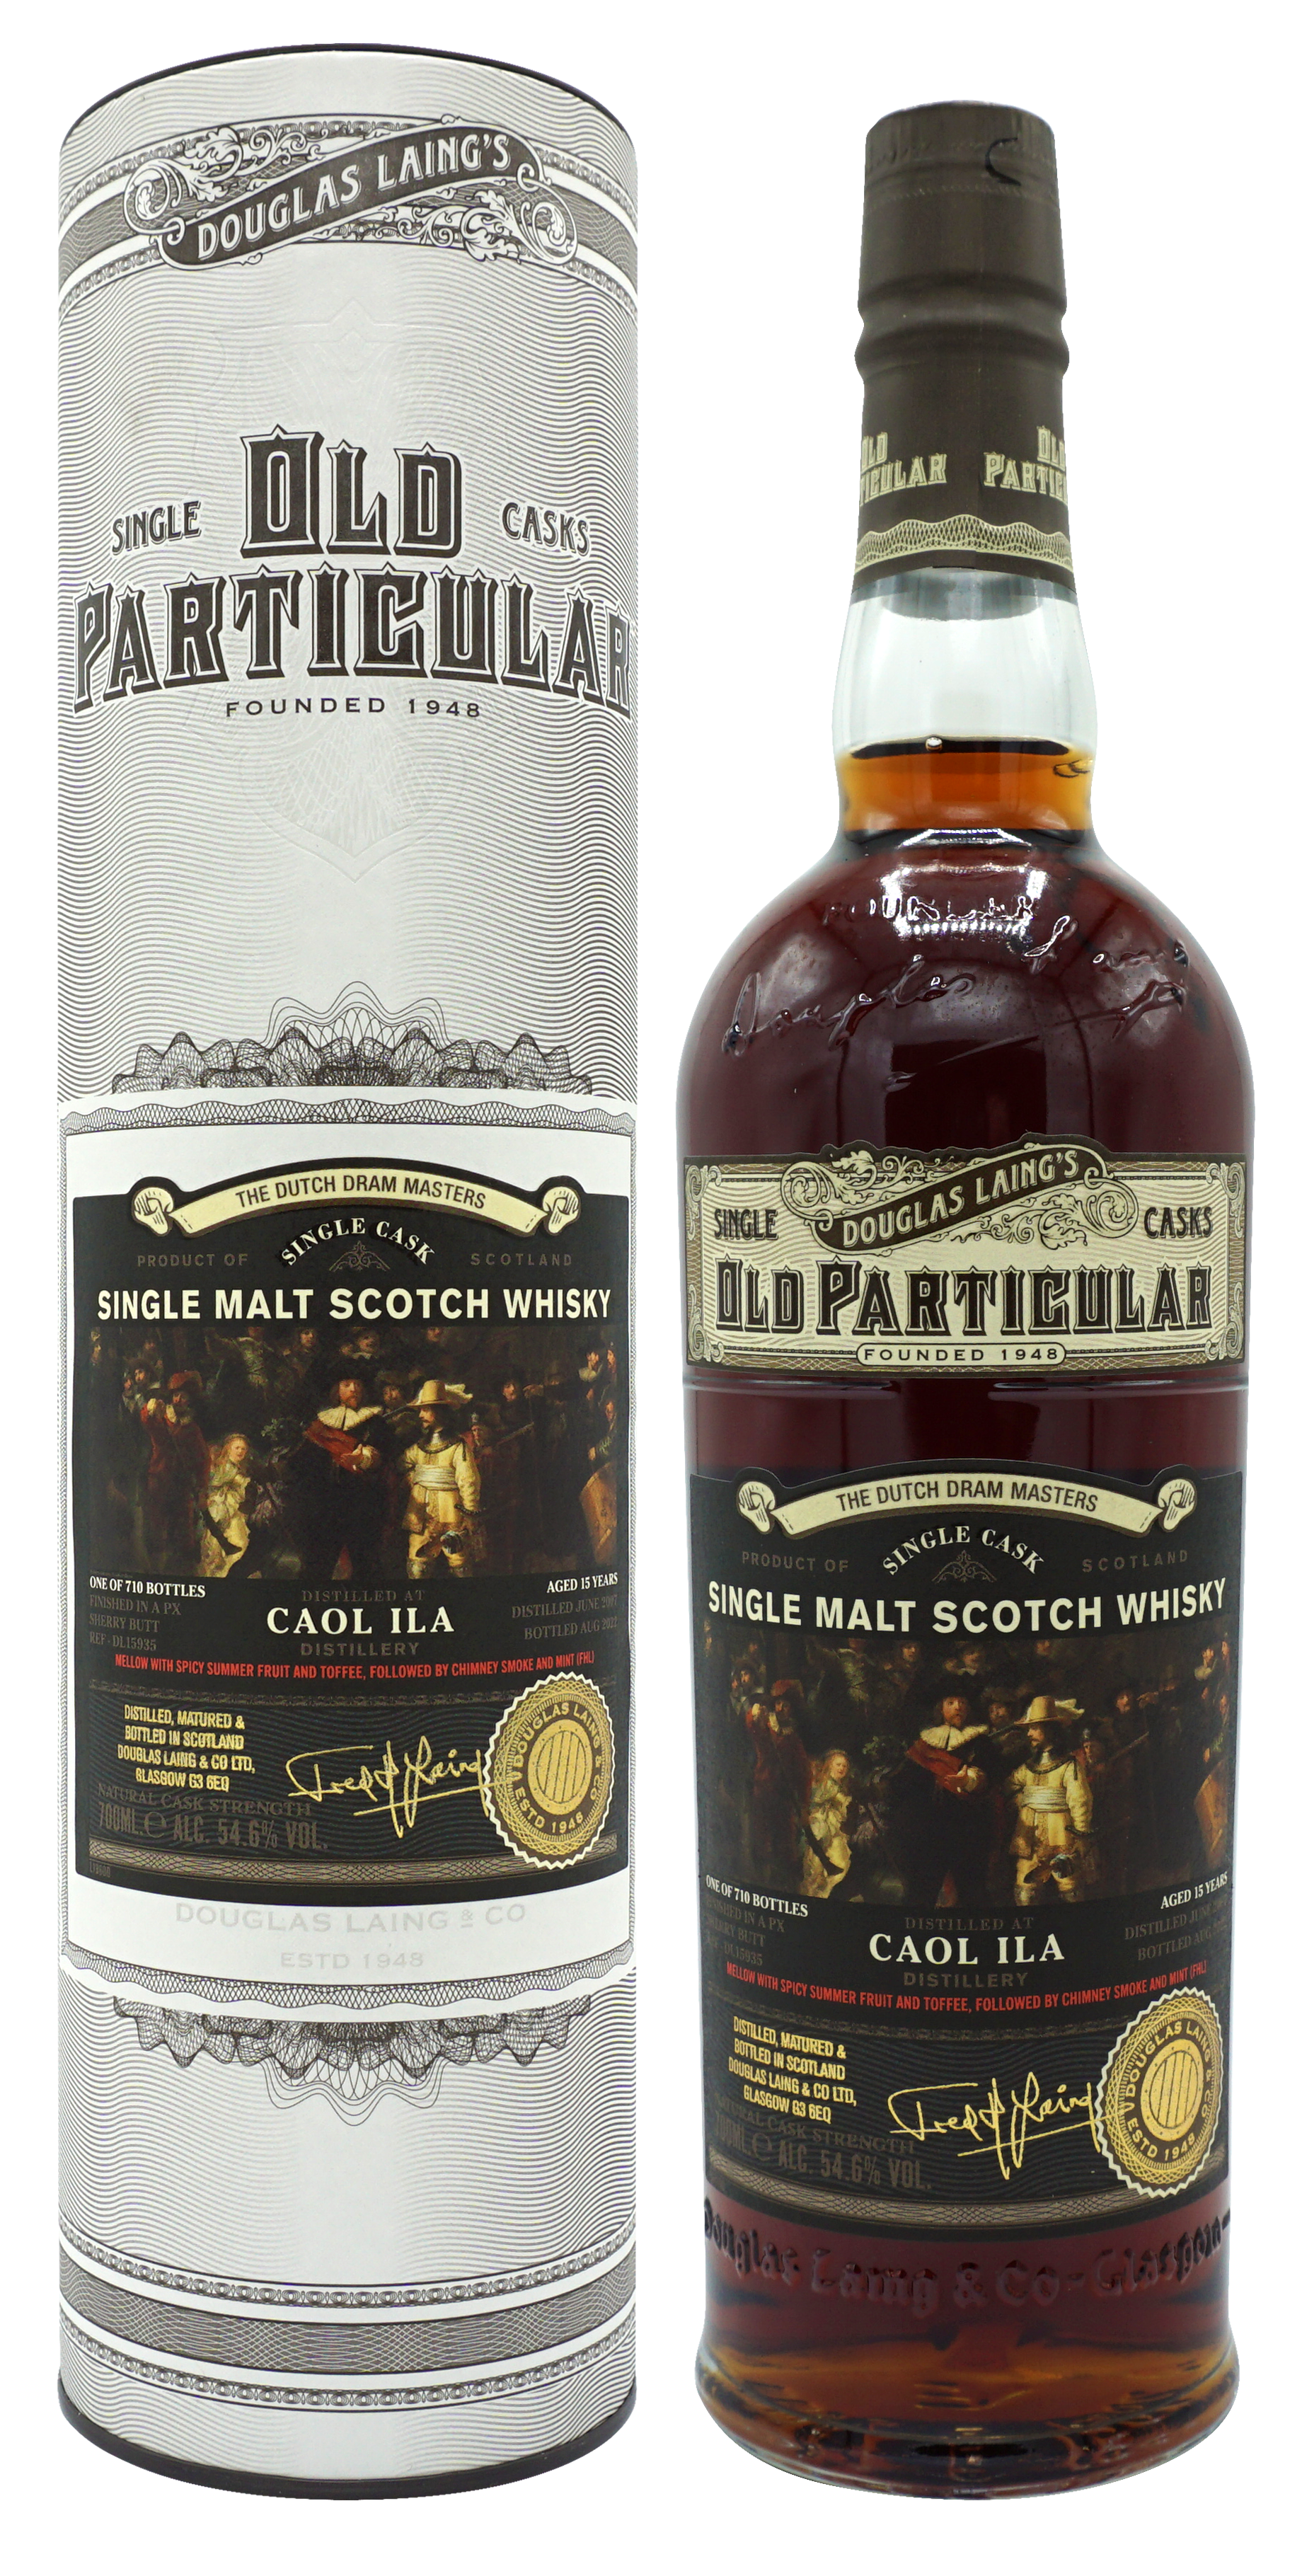 Old Particular Ddr Caol Ila 15 Years Single Malt 70cl 546 Compleet